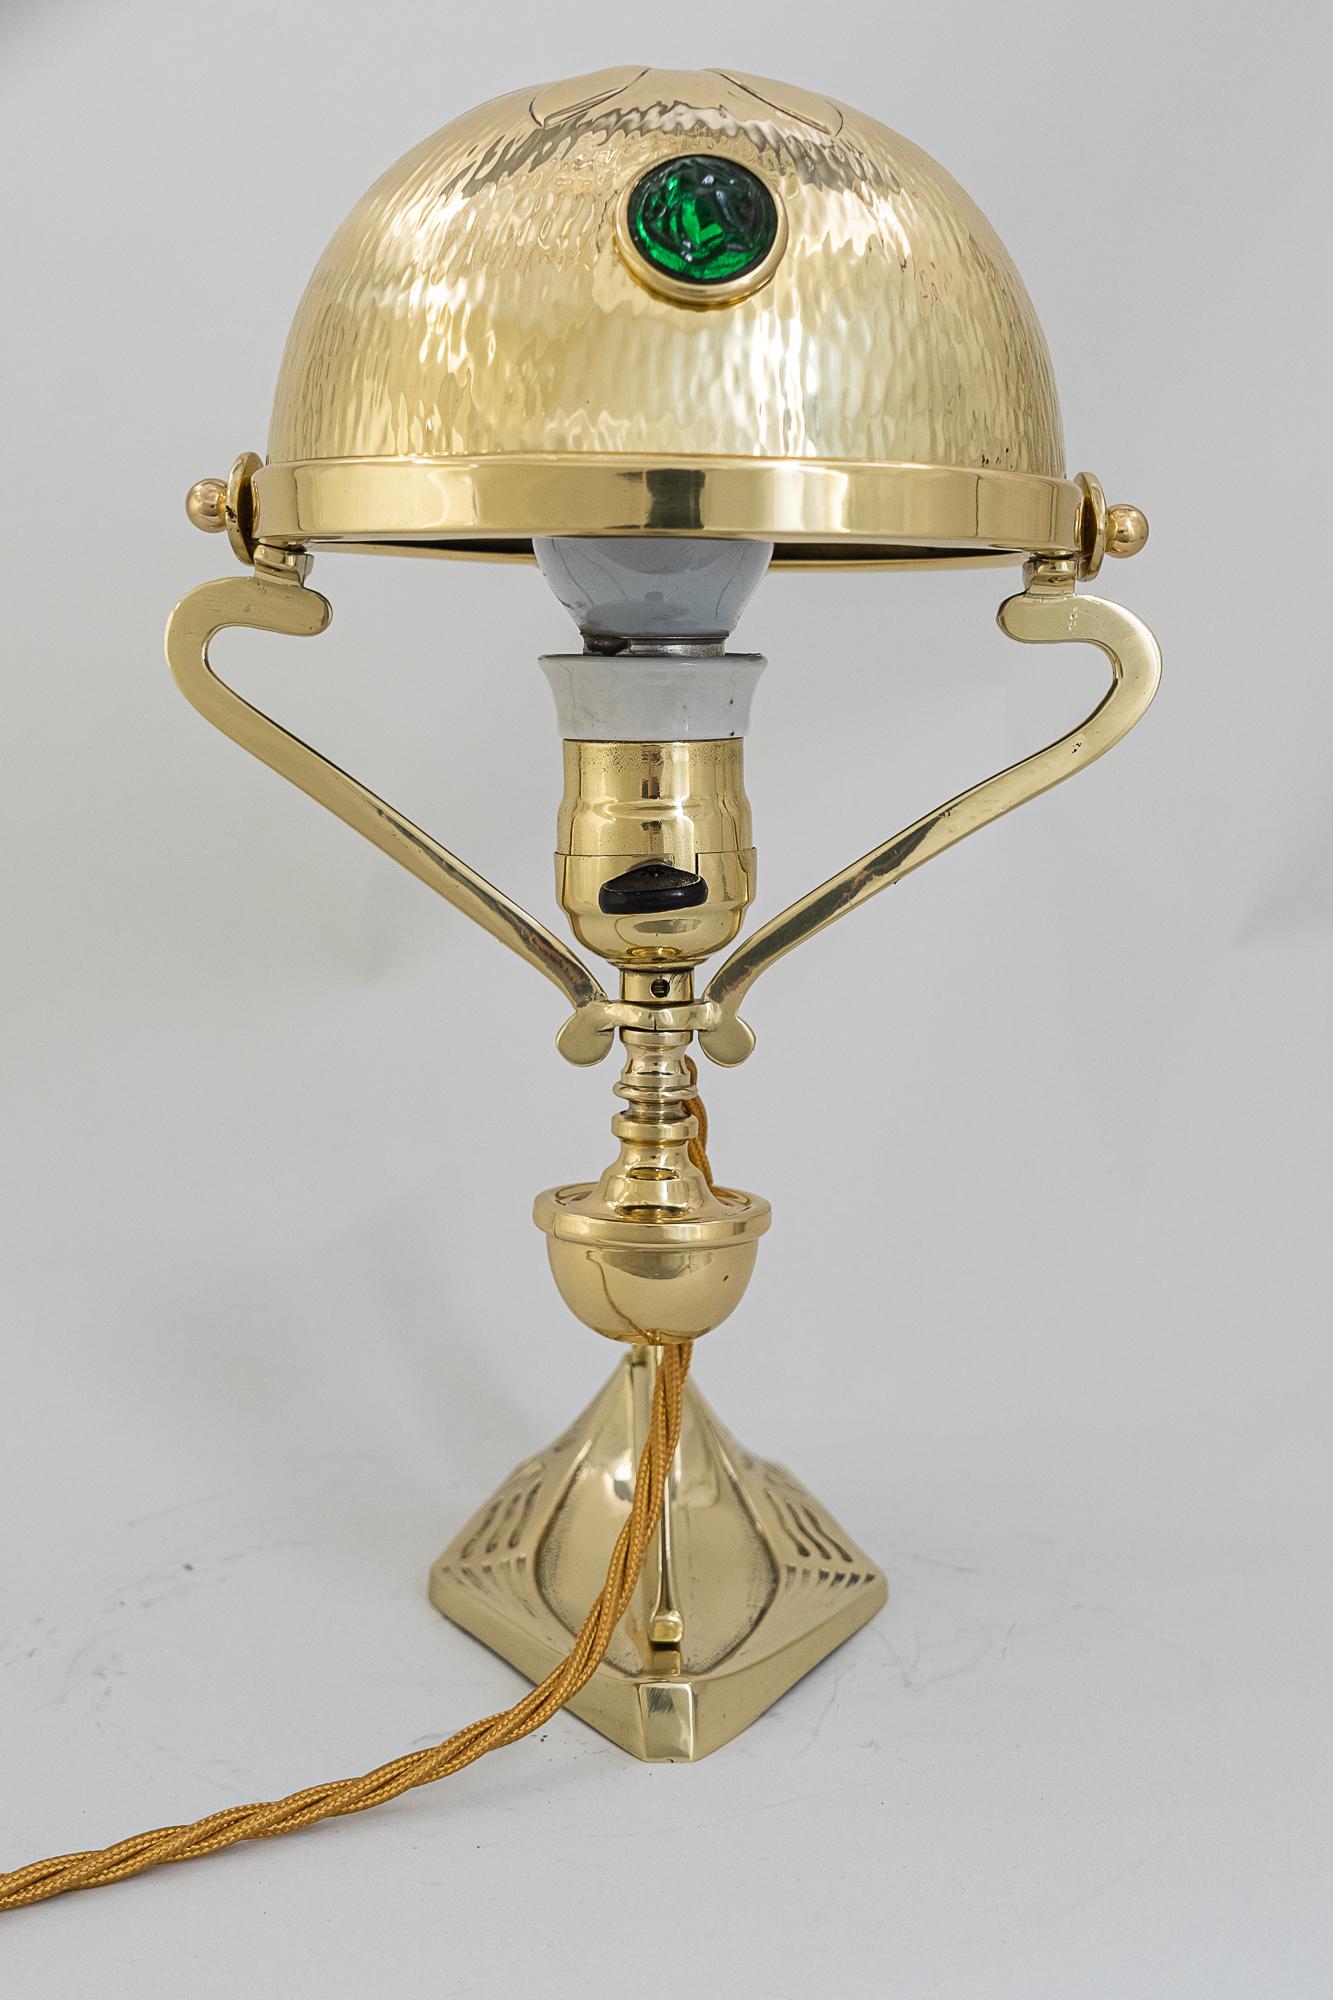 Lacquered Jugendstil Table Lamp, Vienna, circa 1909